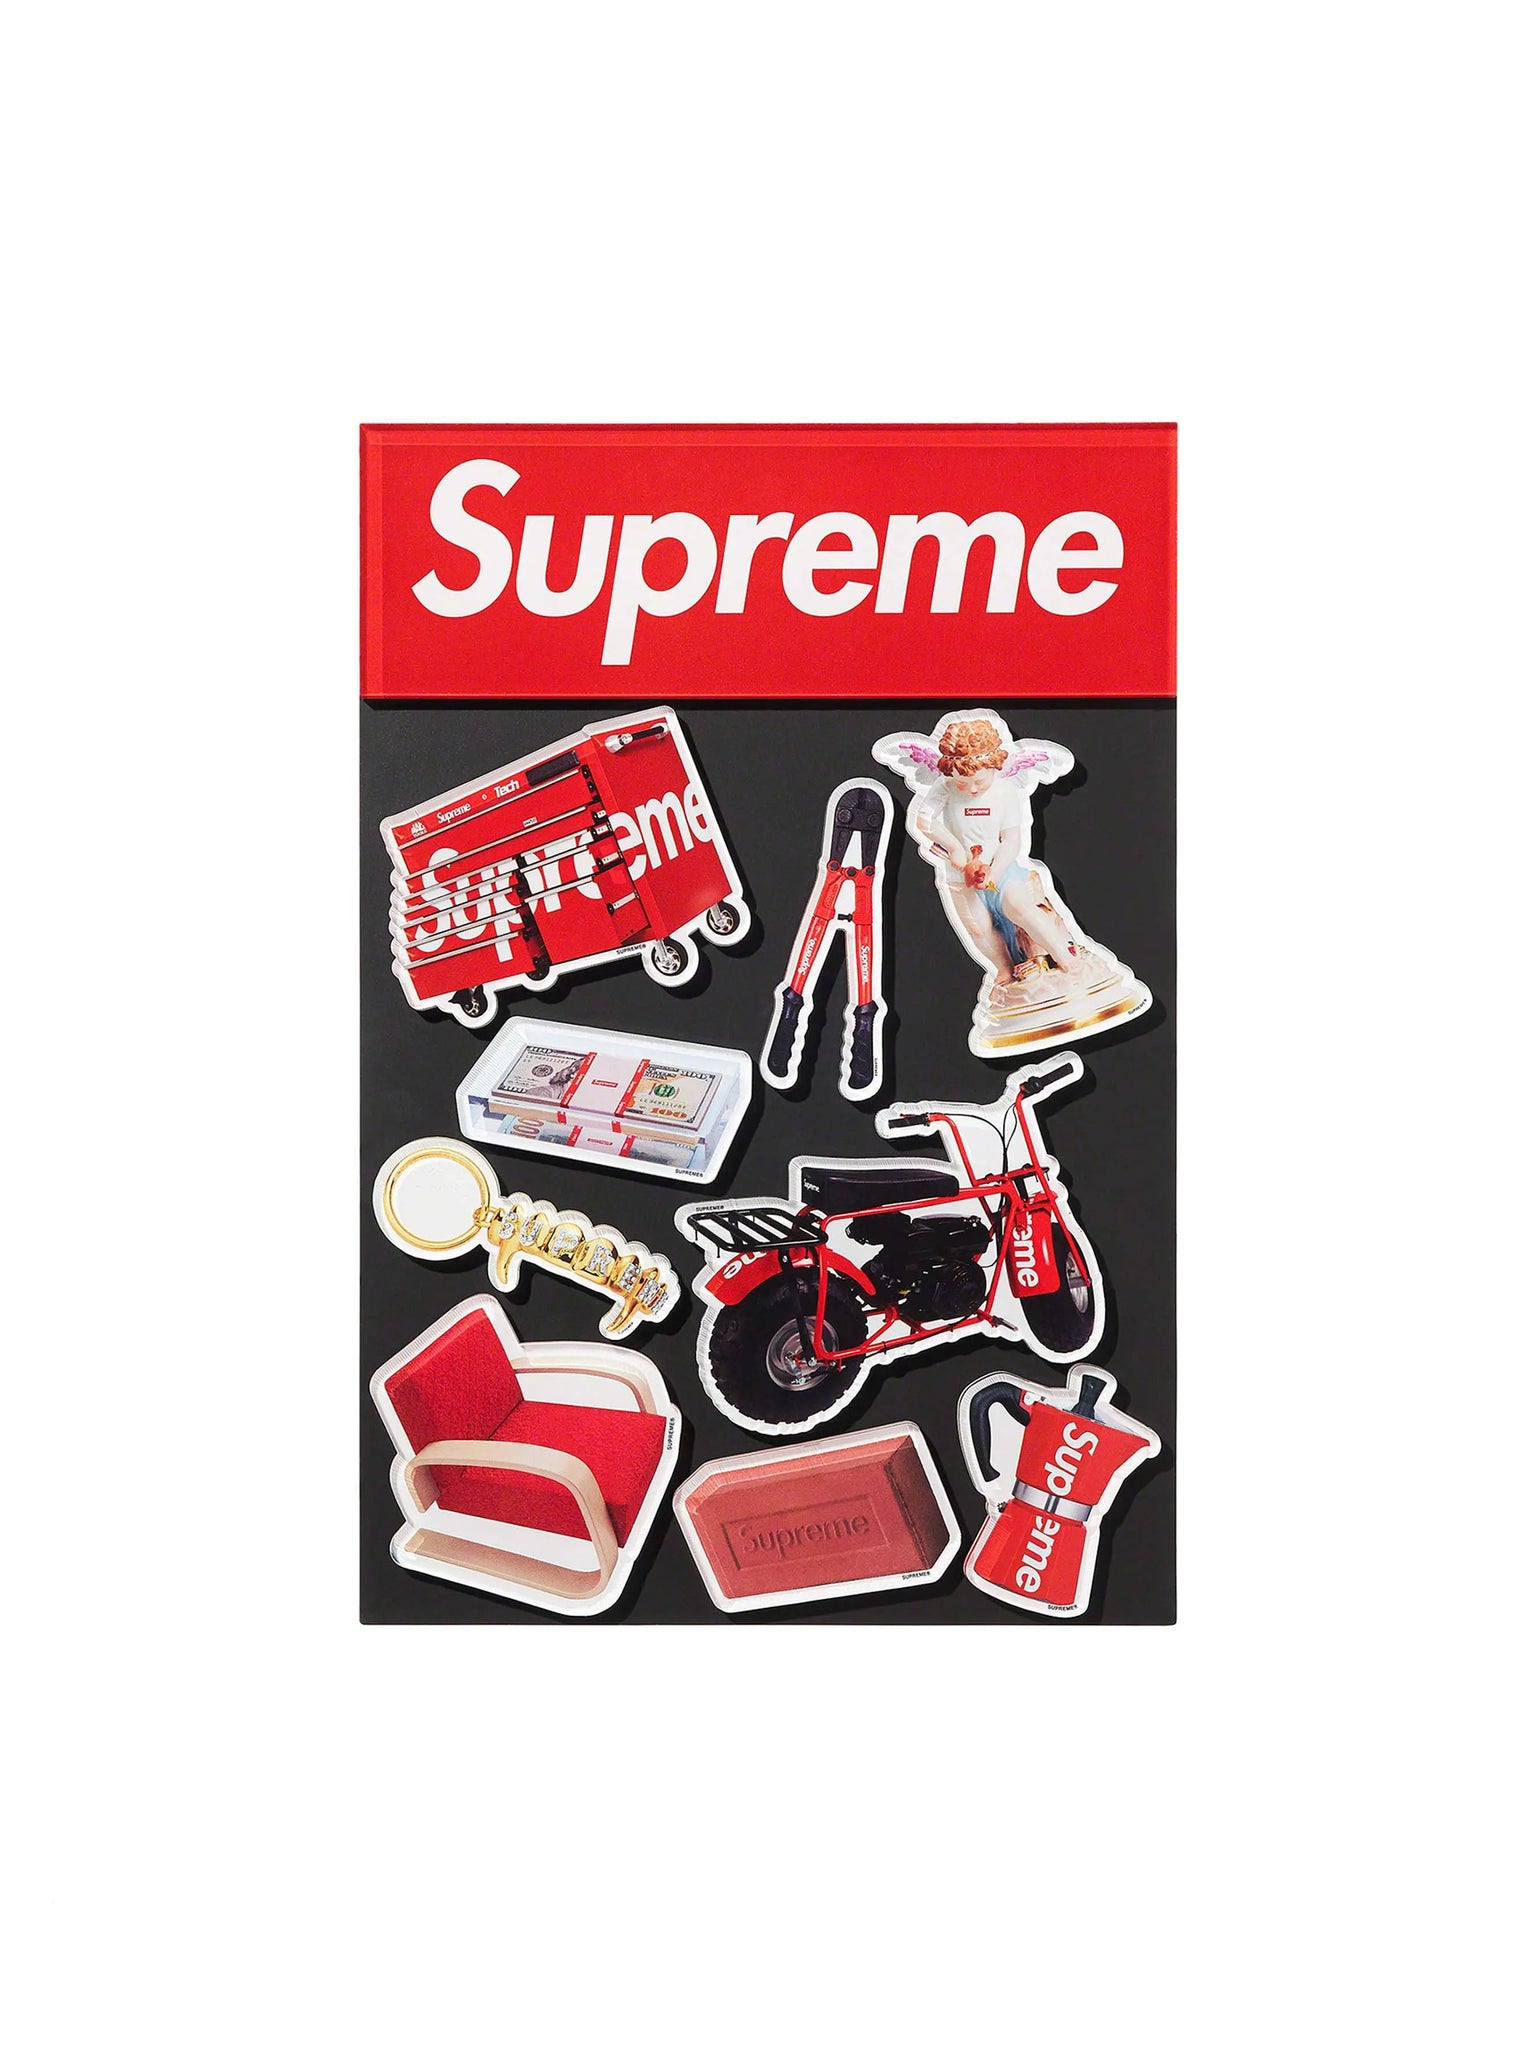 Supreme Magnets (10 Pack) in Auckland, New Zealand - Shop name